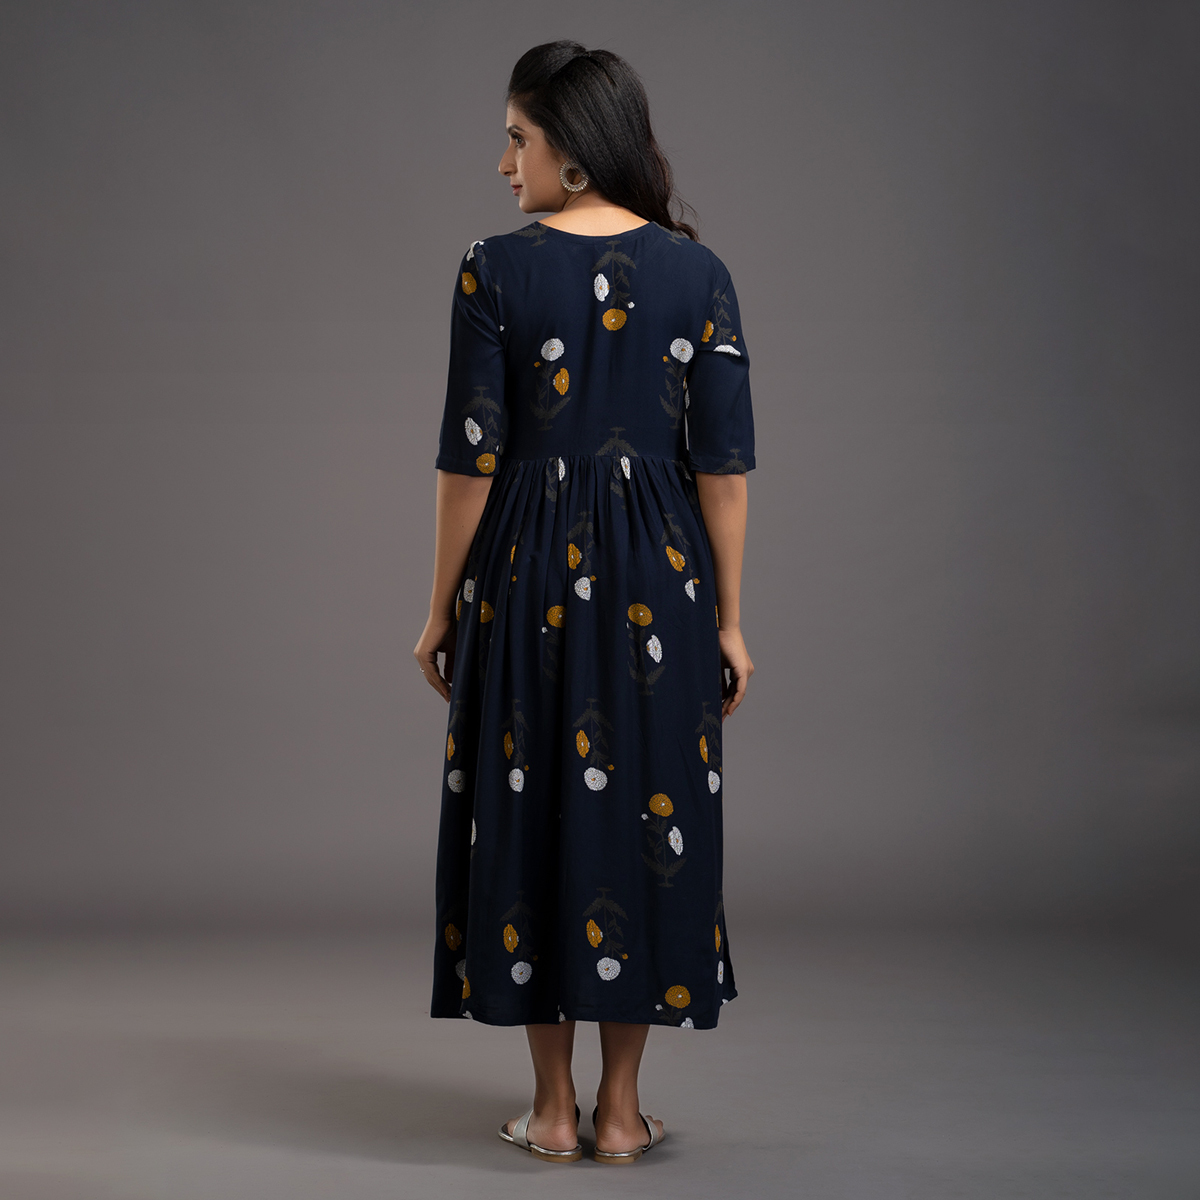 Zella Floral Printed Rayon Midi Dress styled with Patch pockets - Navy Blue